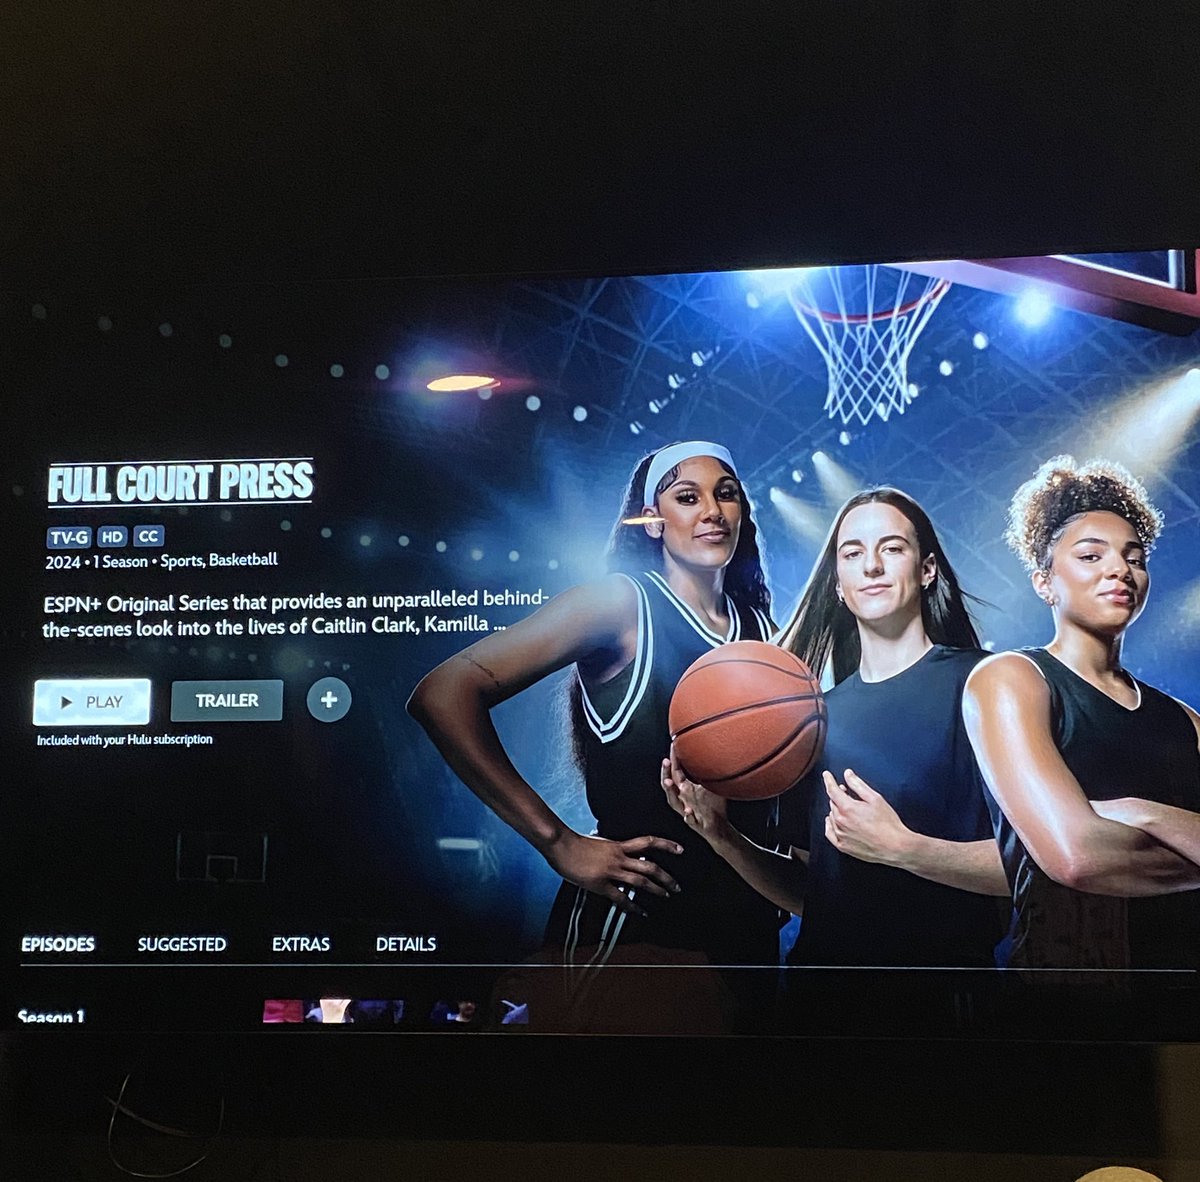 I like how #FullCourtPress ft Caitlin Clark is rated TV-G on Disney+ but as soon as you click play it says “the following contains mature language viewer discretion is advised” which means uncensored F and S bombs